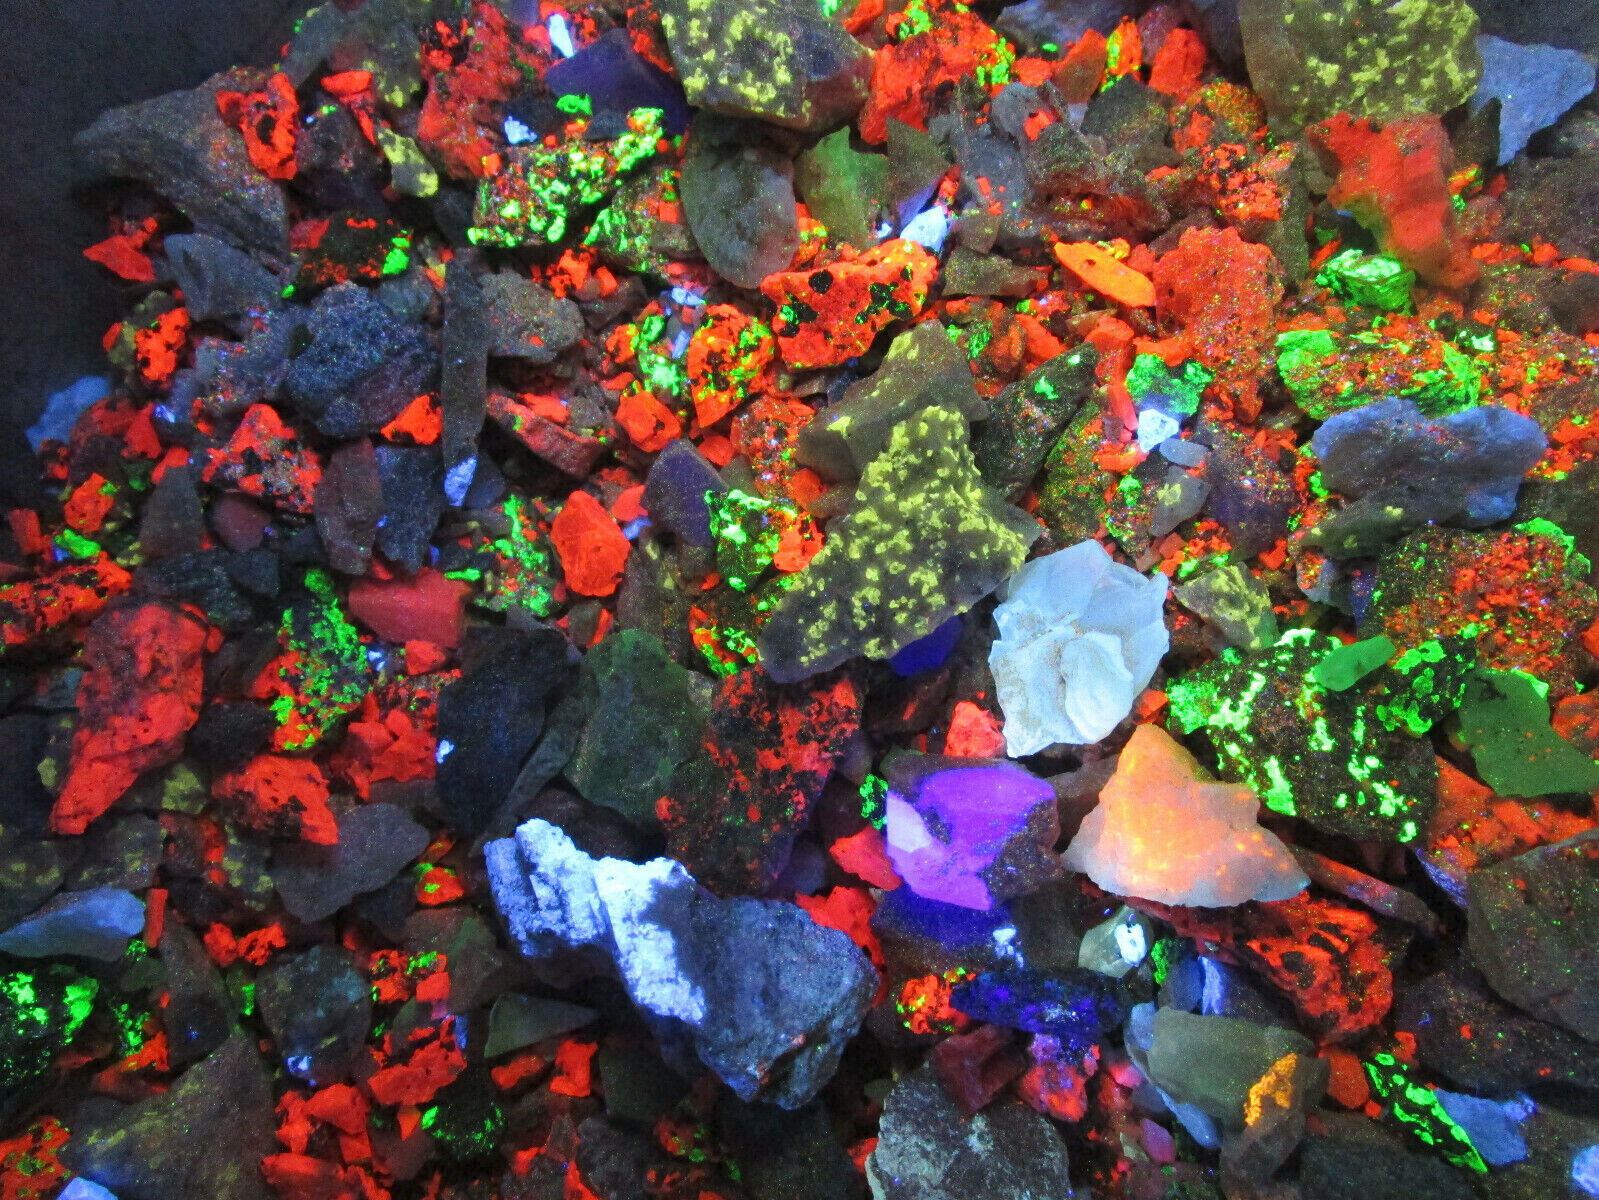 Half Pound fluorescent mineral rocks small colorful rock chips and some sand